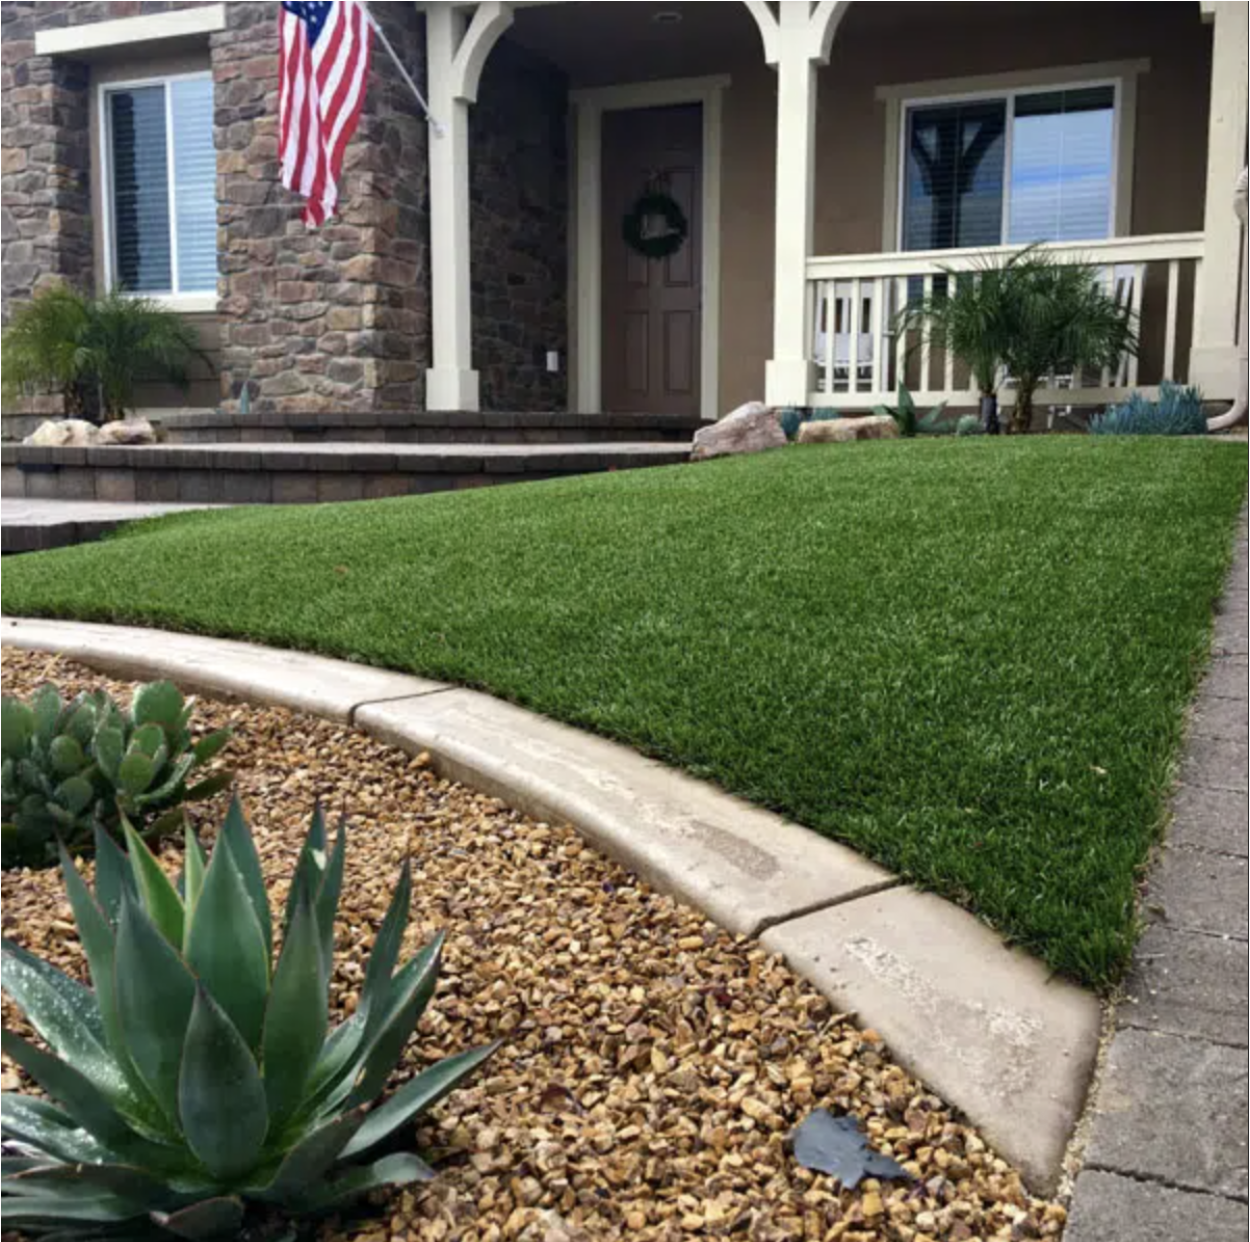 Installing Artificial Grass in Your Front Yard. Do’s & Don’ts.